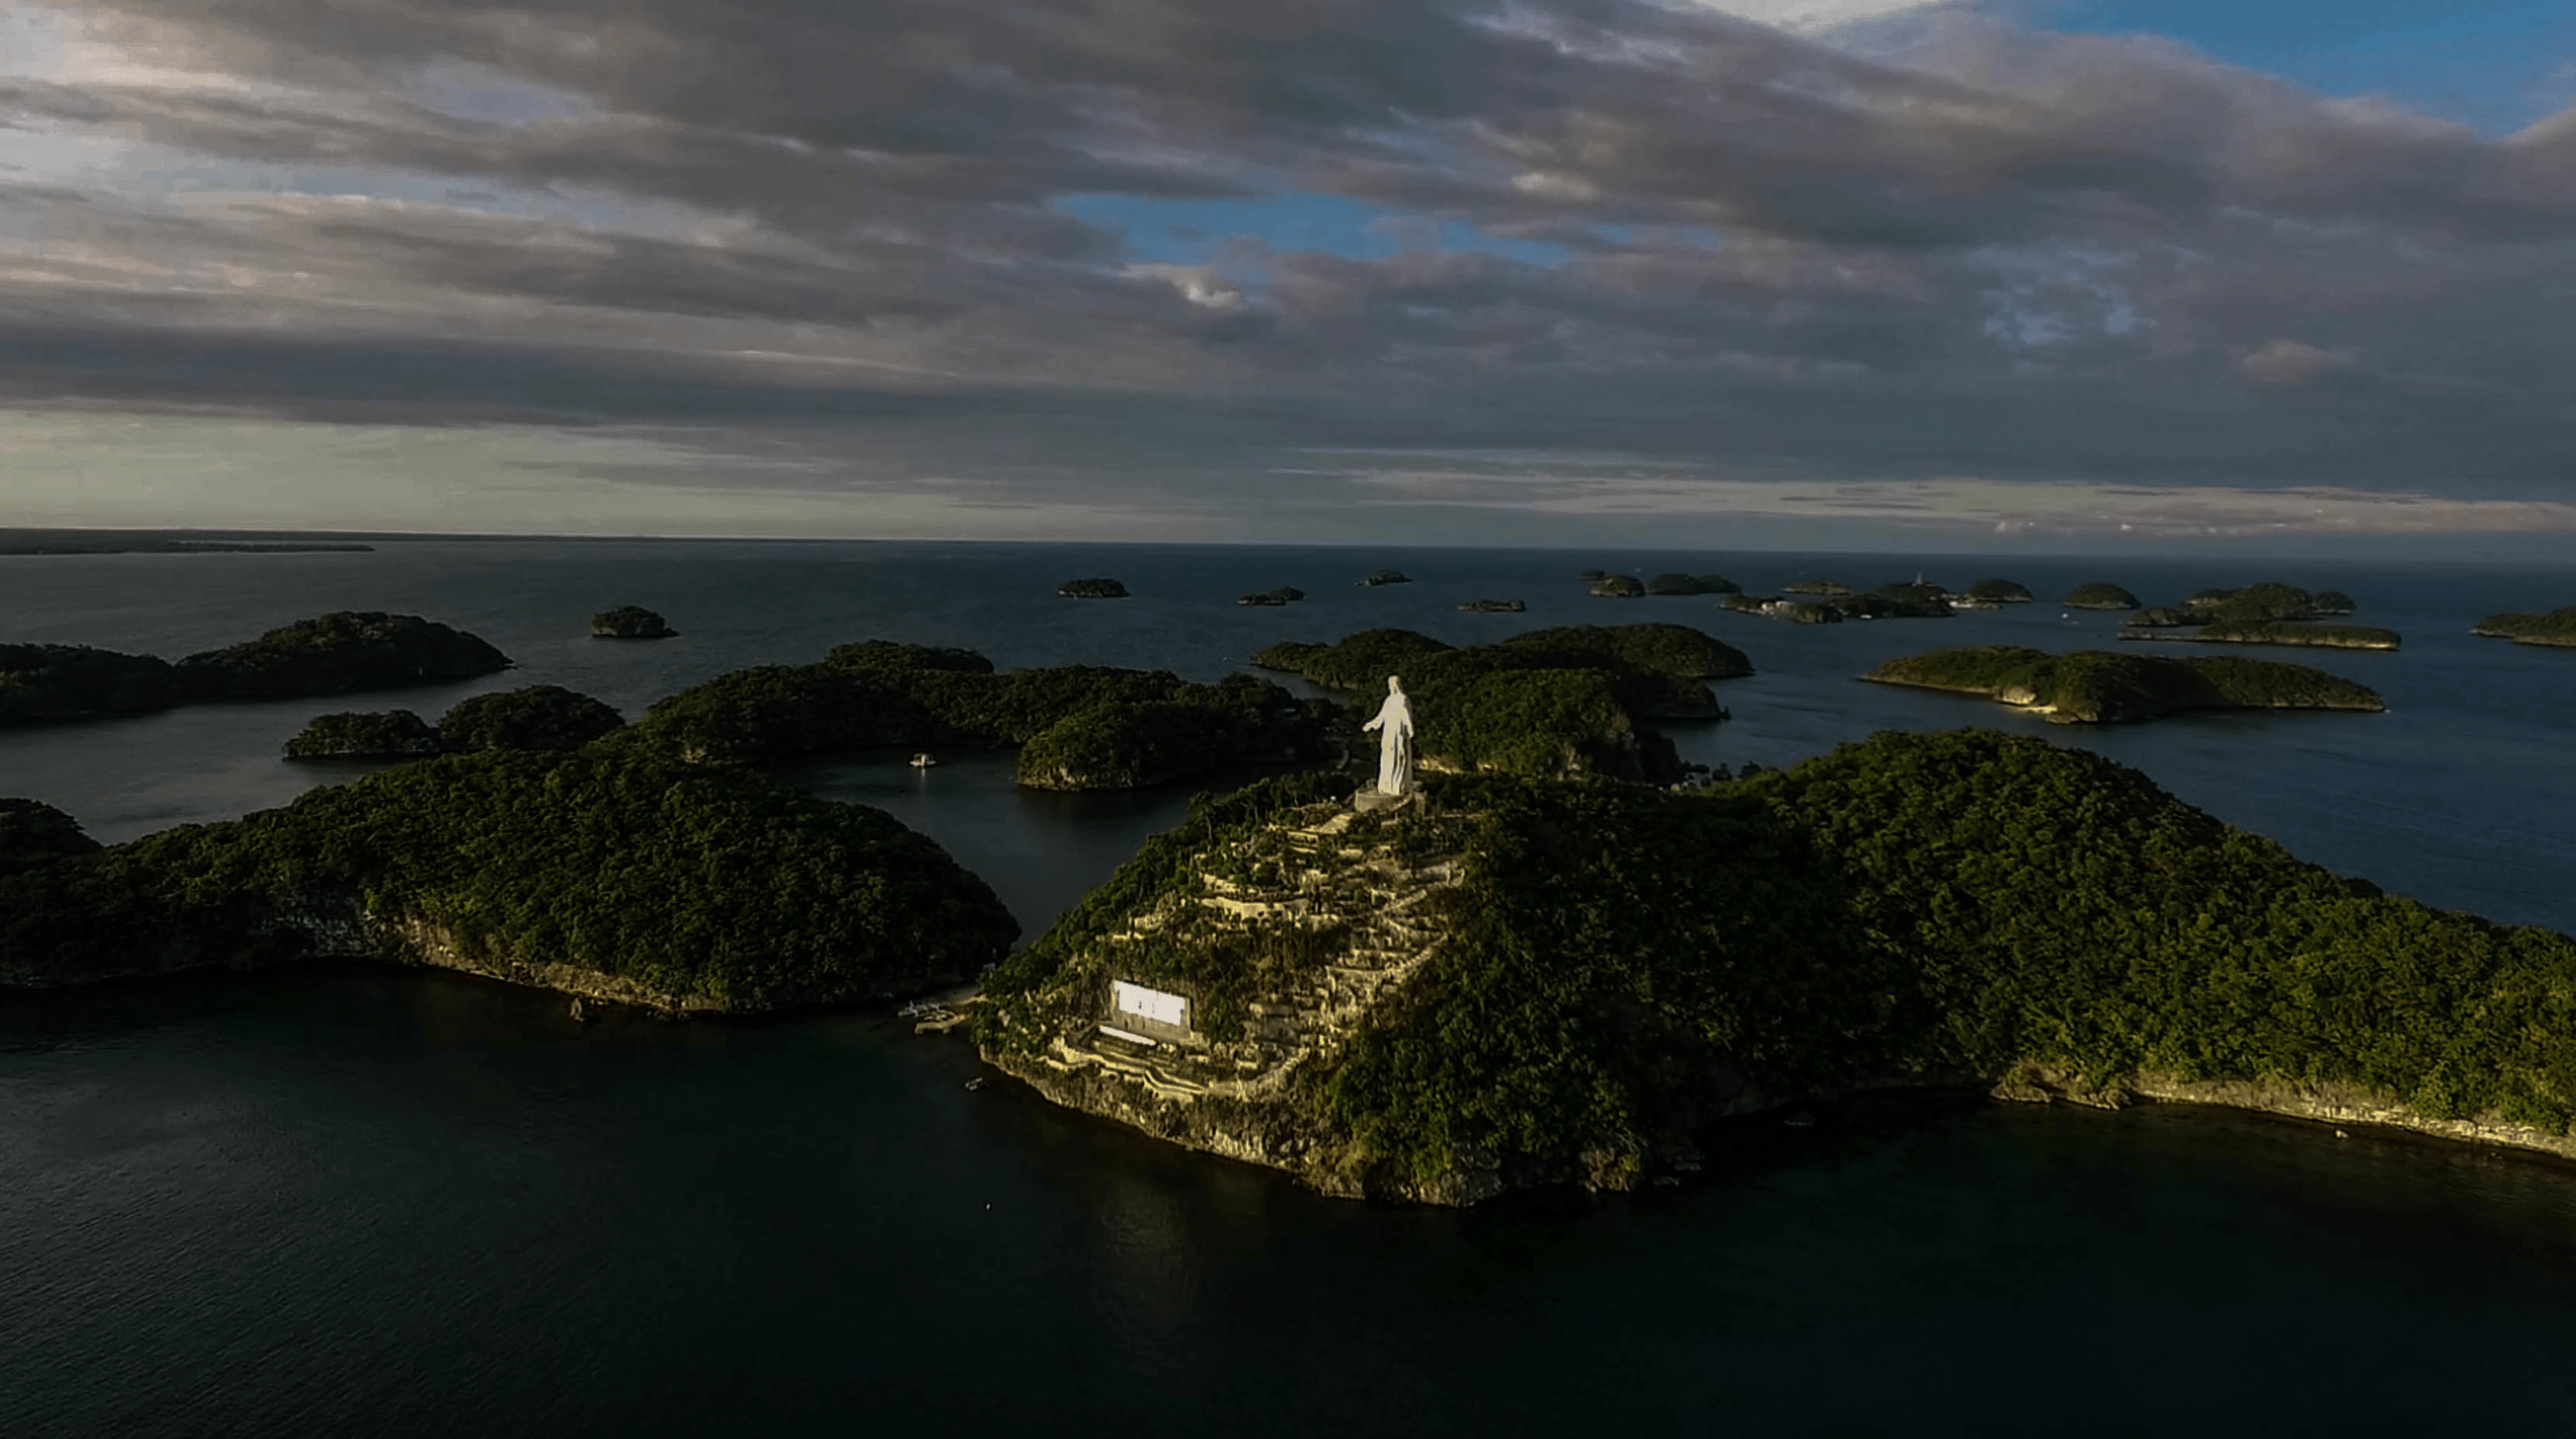 drone image of jesus statue at pilgrimage island in hundred islands pangasinan philippines